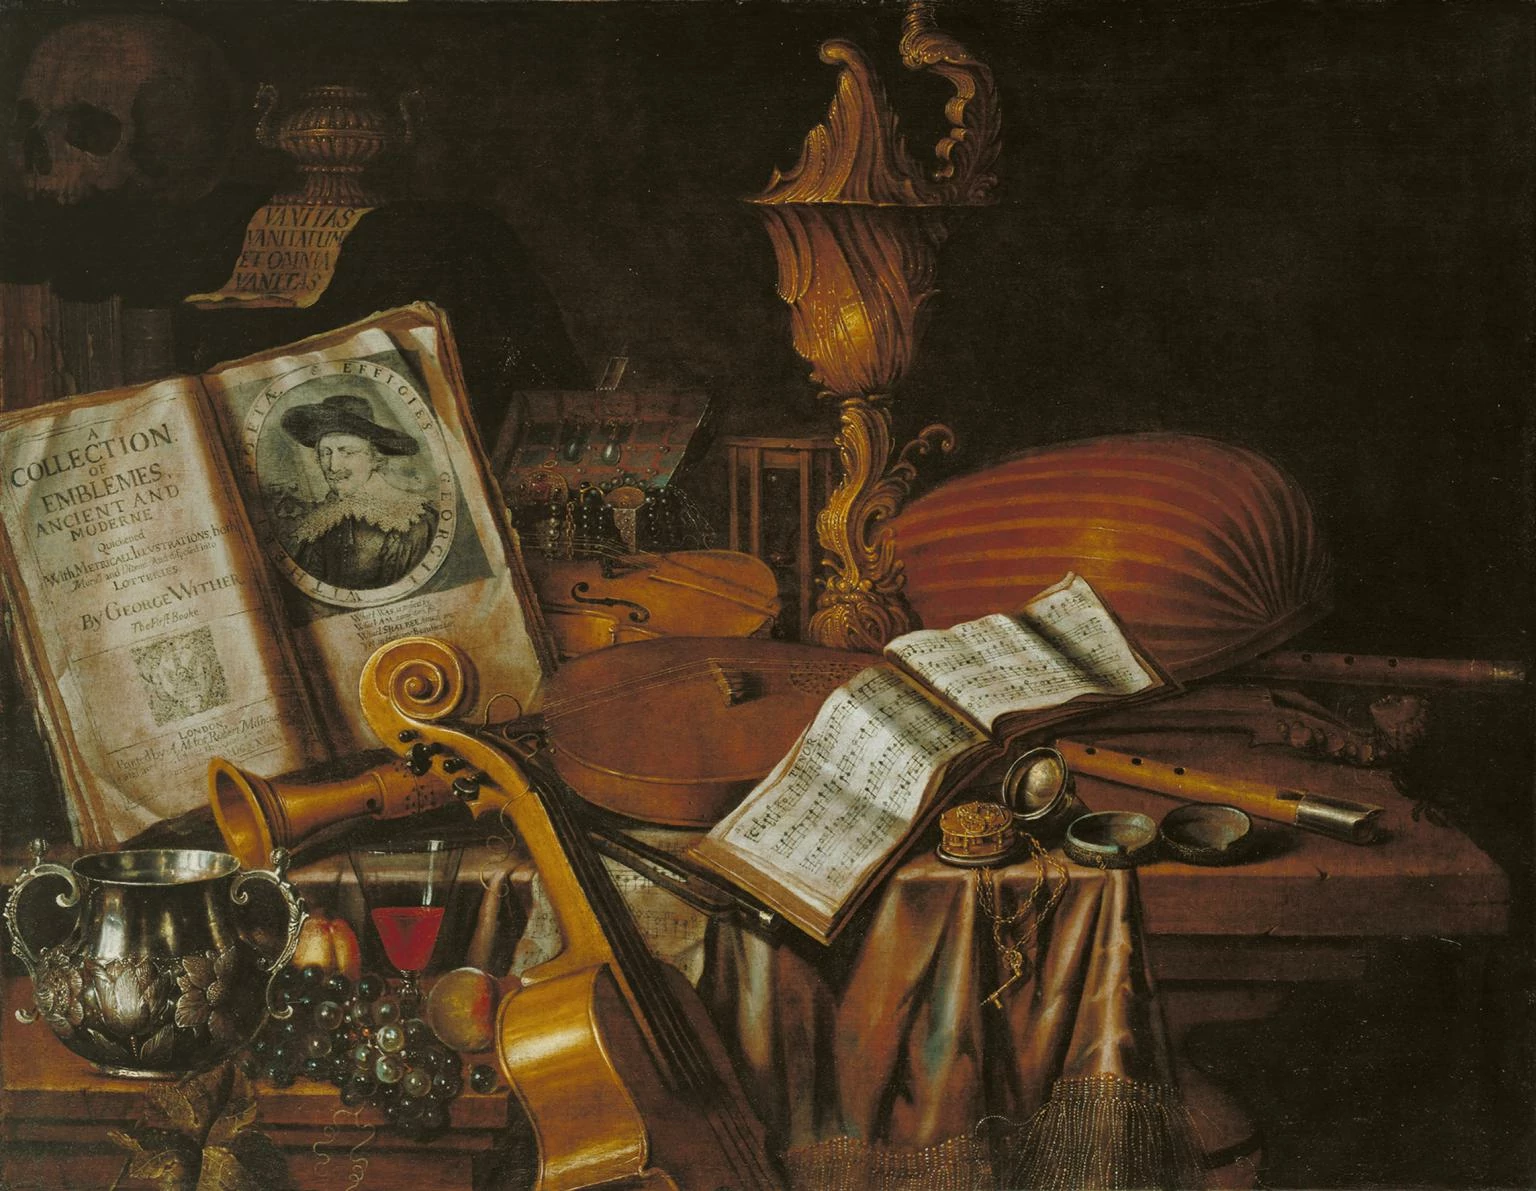 Still Life with a Volume of Wither’s ‘Emblemes’, Edwaert Collier